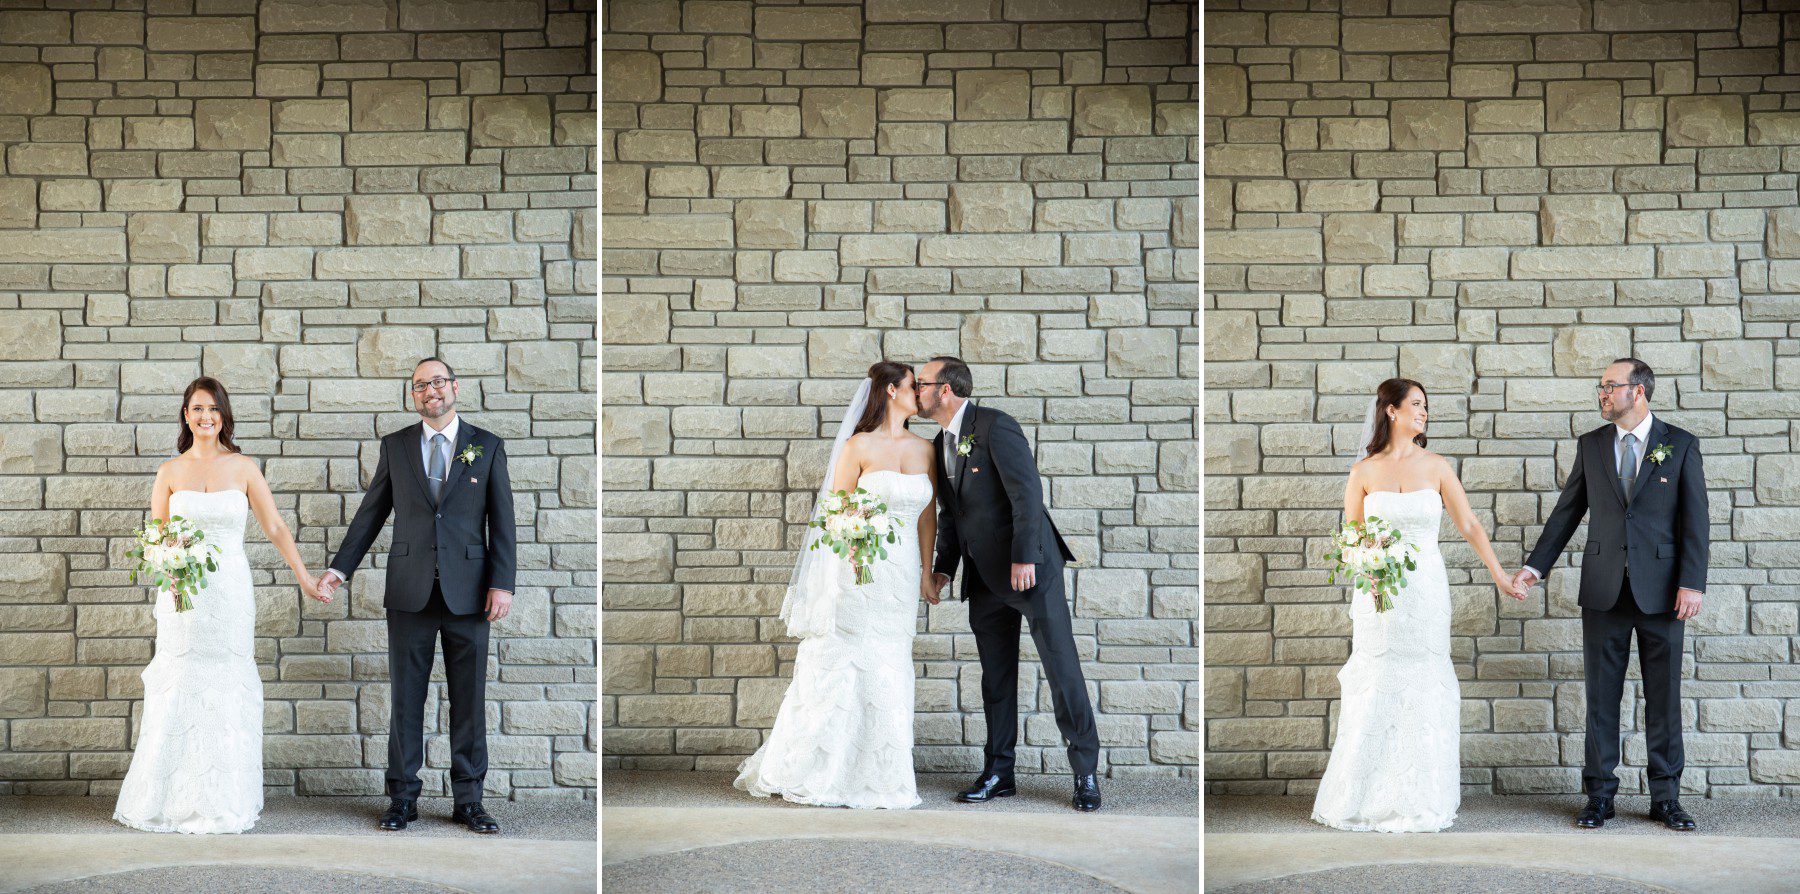 Bride and groom portraits at private home in Belle Meade 